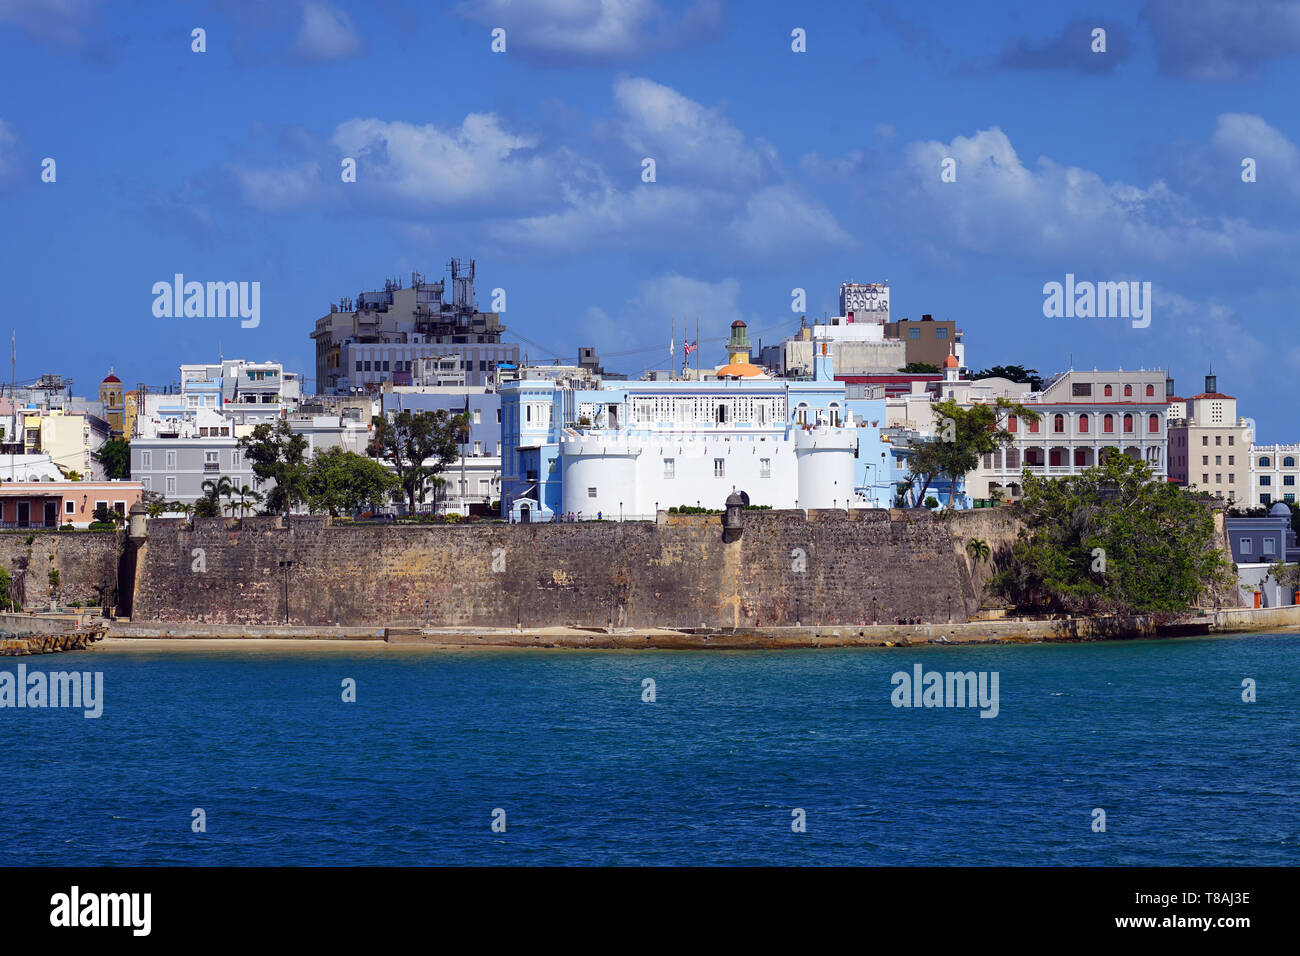 La Fortaleza in Old San Juan, Puerto Rico. La Fortaleza (The Fortress) is the official residence of the Governor of Puerto Rico. Puerto Rico, USA Stock Photo